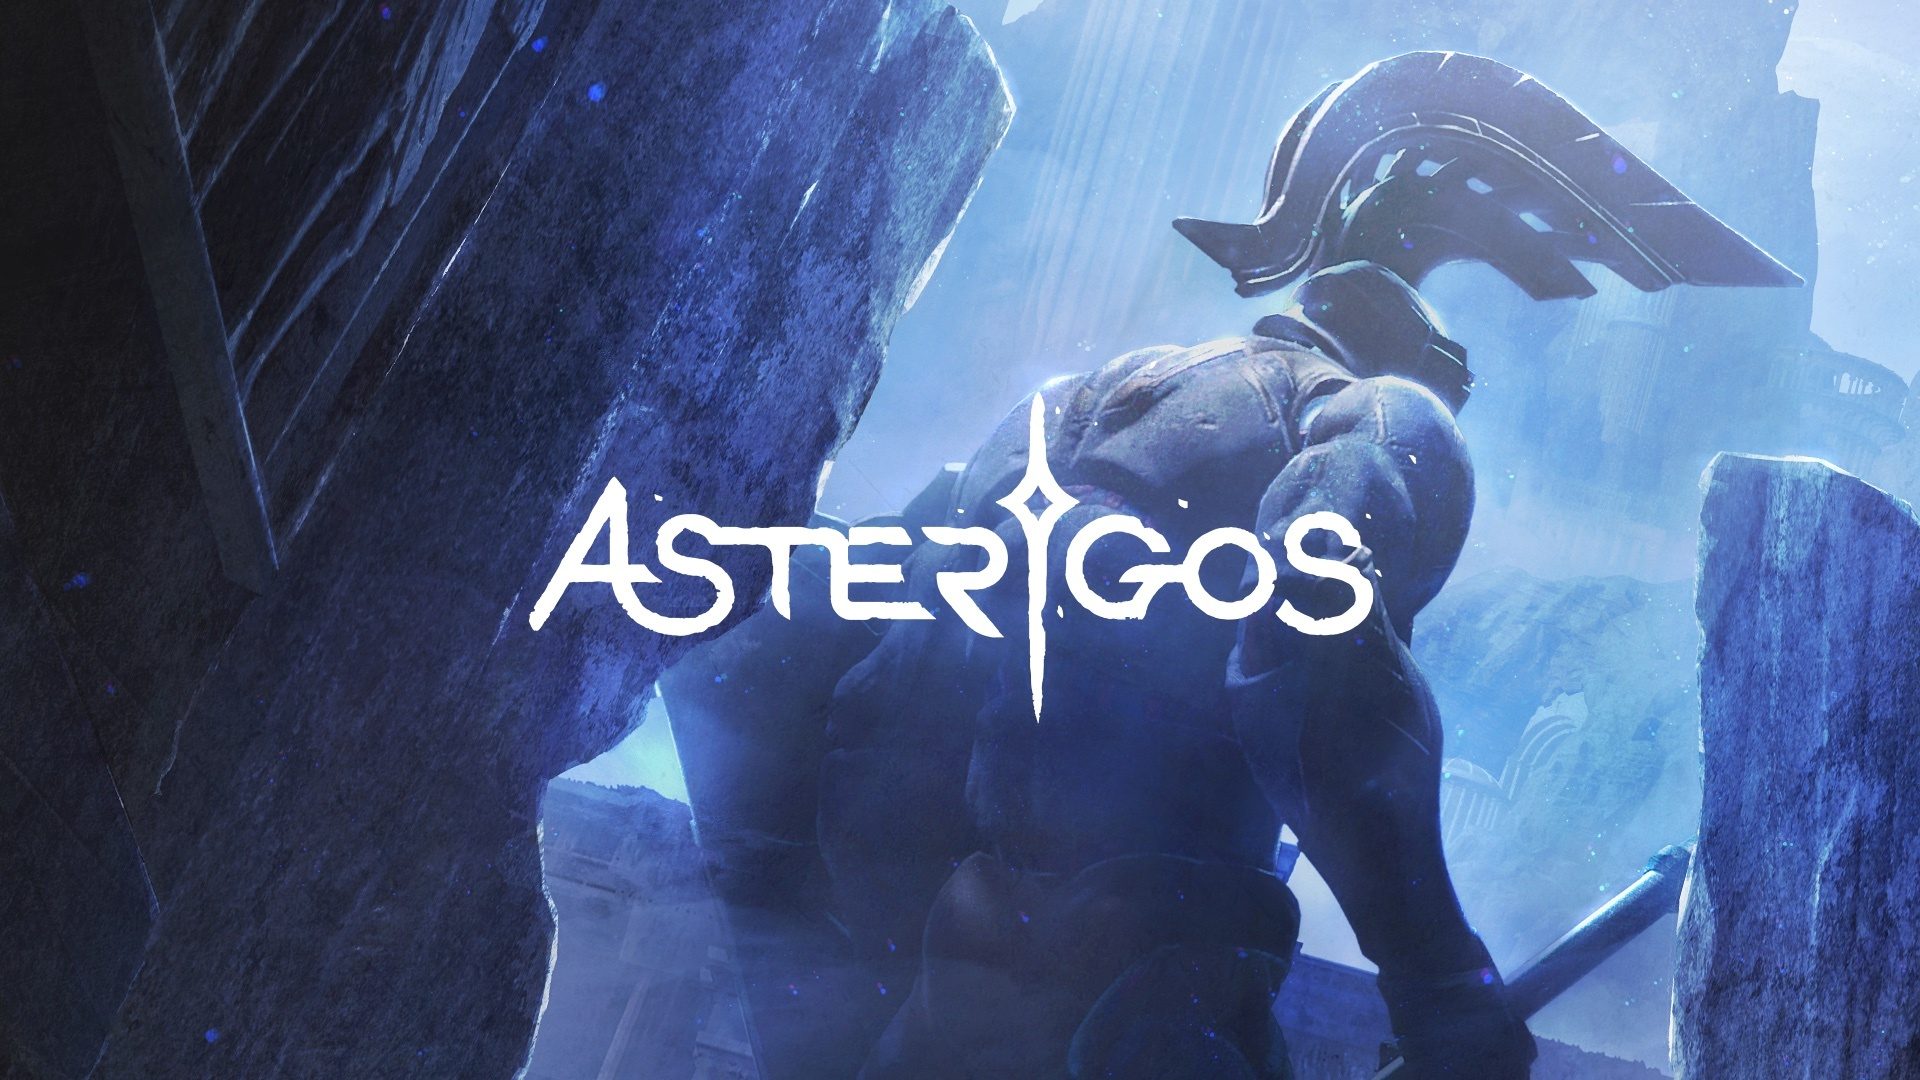 Video Game Asterigos: Curse of the Stars HD Wallpaper | Background Image